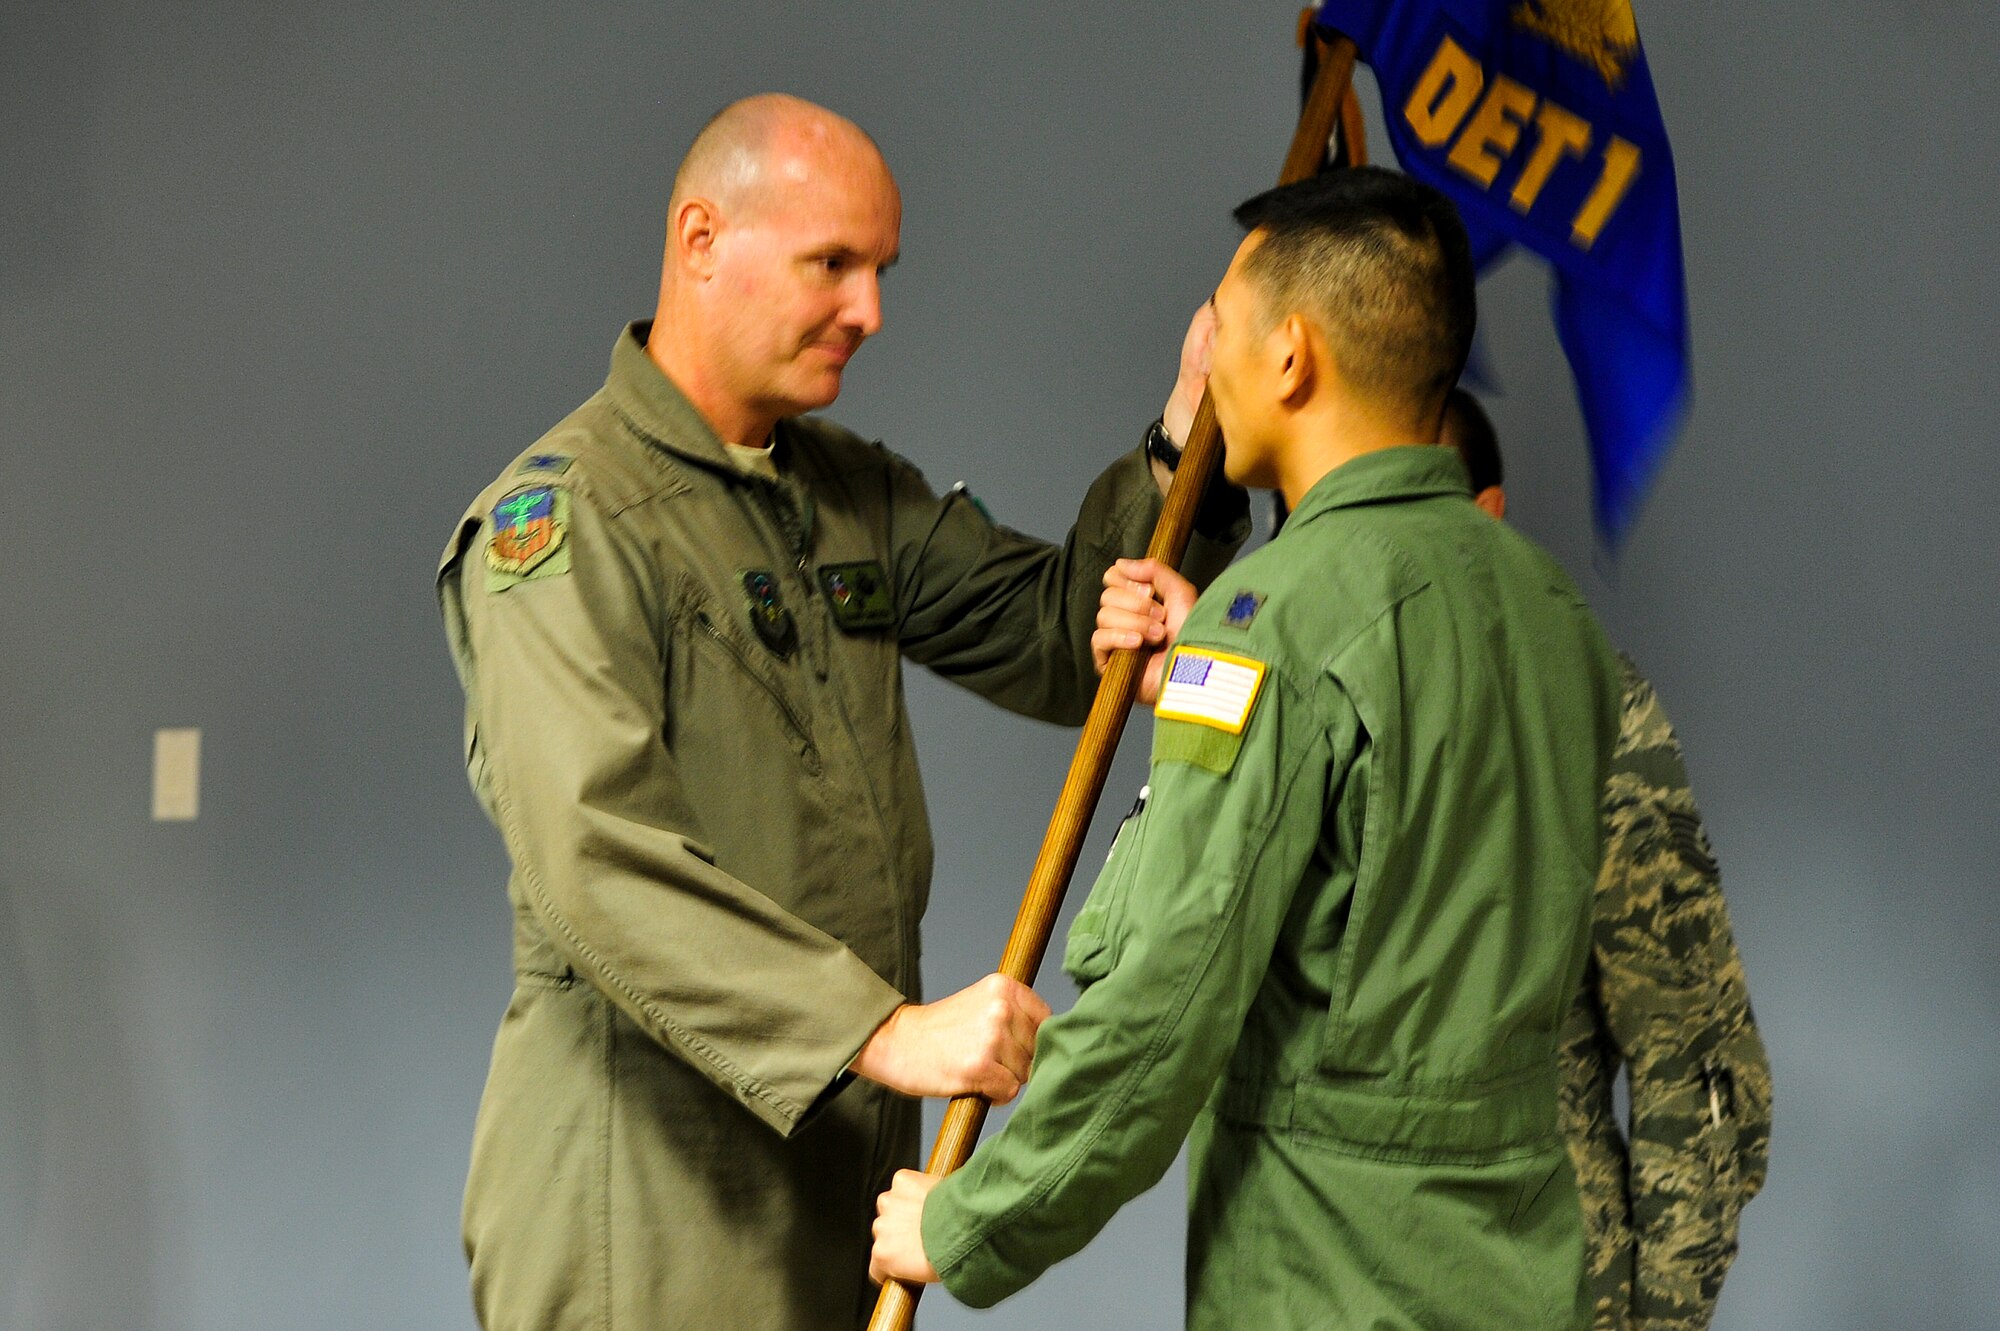 Lt. Col. Samuel Kwan, Detachment 1, 1st Special Operations Group commander, assumes command from Col. Shawn Cameron, 1st SOG commander, during an activation ceremony at the 9th Special Operations Squadron at Hurlburt Field, Fla., Oct. 3, 2014. Det. 1 will facilitate the MC-130P, 9th SOS drawdown and accommodate personnel permanent change of station and permanent change of assignment actions, and eventually retire the MC-130P in May 2015. (U.S. Air Force photo/Airman 1st Class Jeff Parkinson)